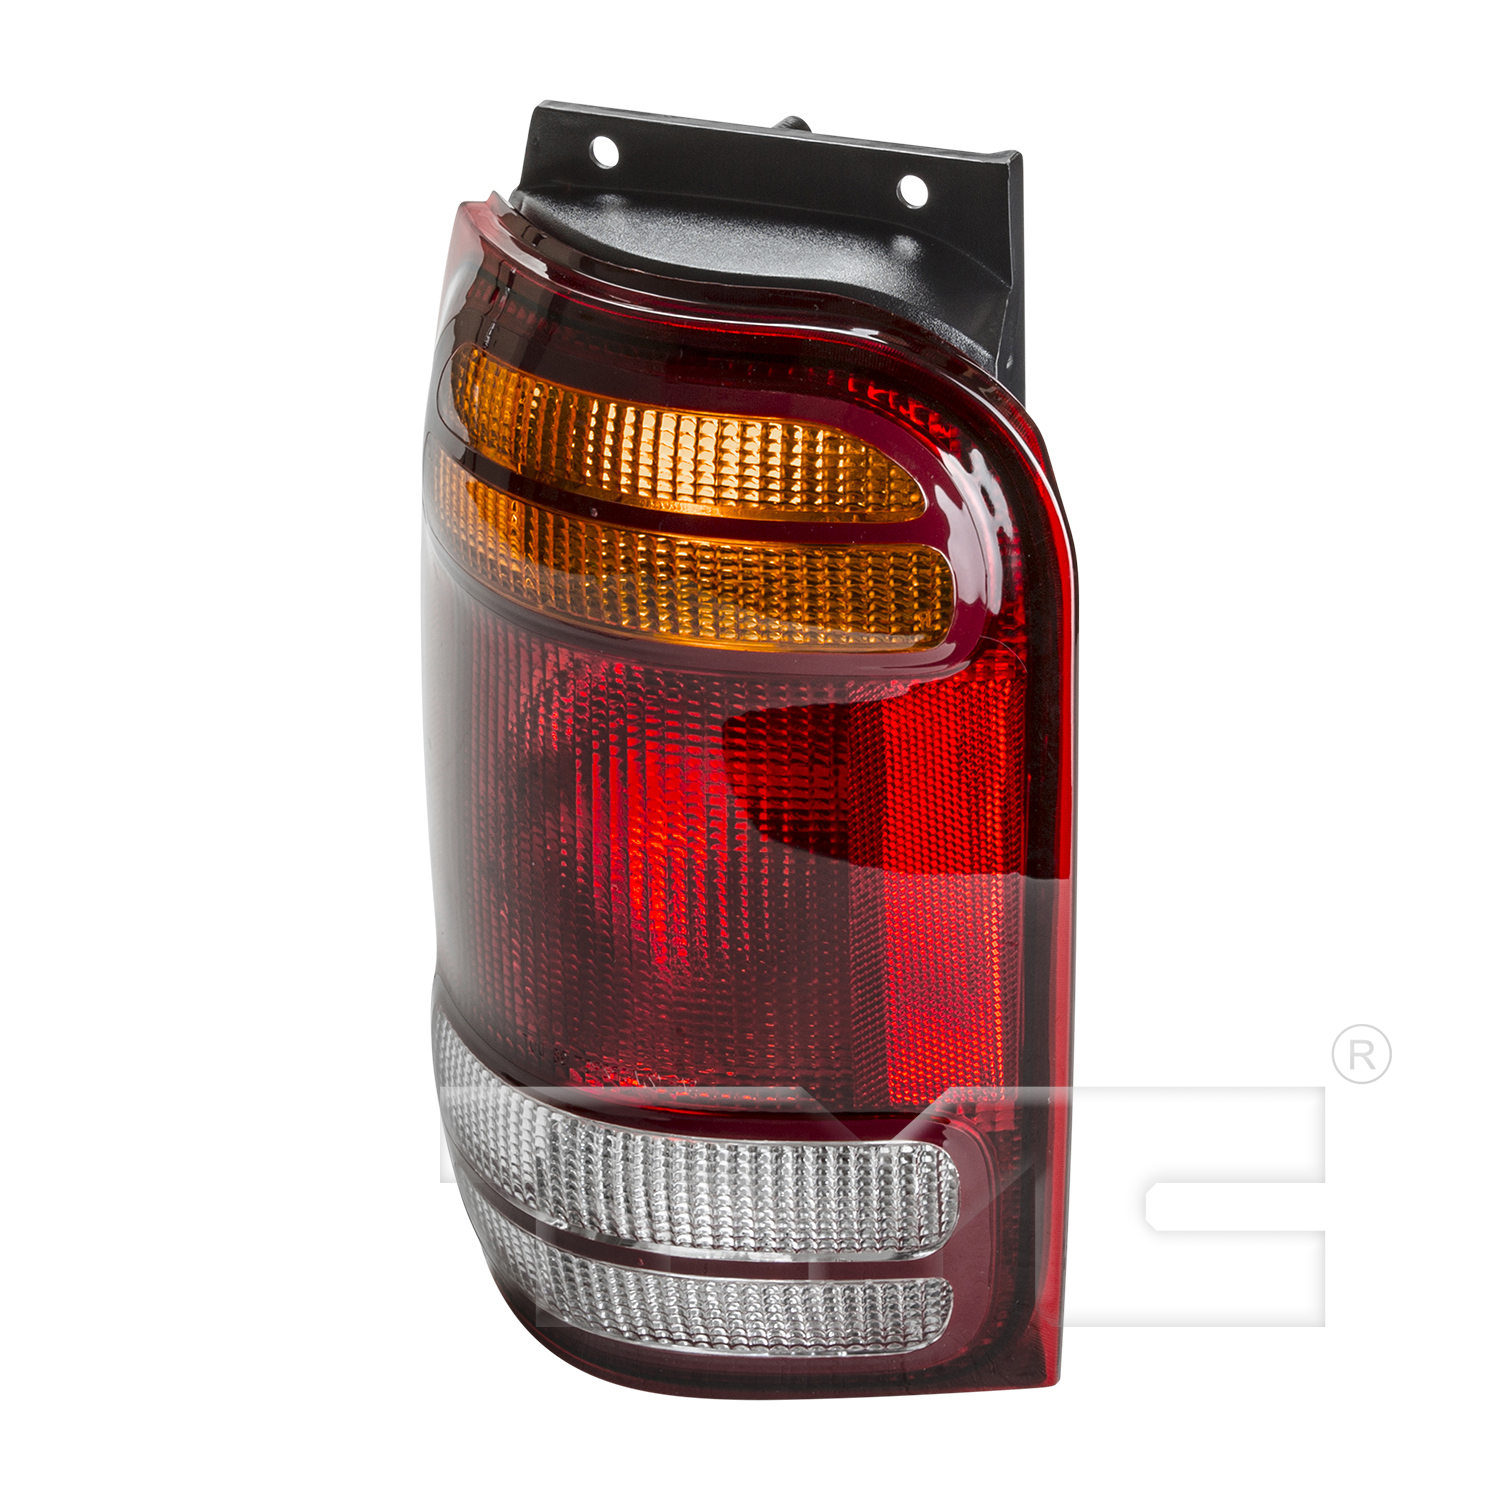 Aftermarket TAILLIGHTS for MERCURY - MOUNTAINEER, MOUNTAINEER,98-01,LT Taillamp assy